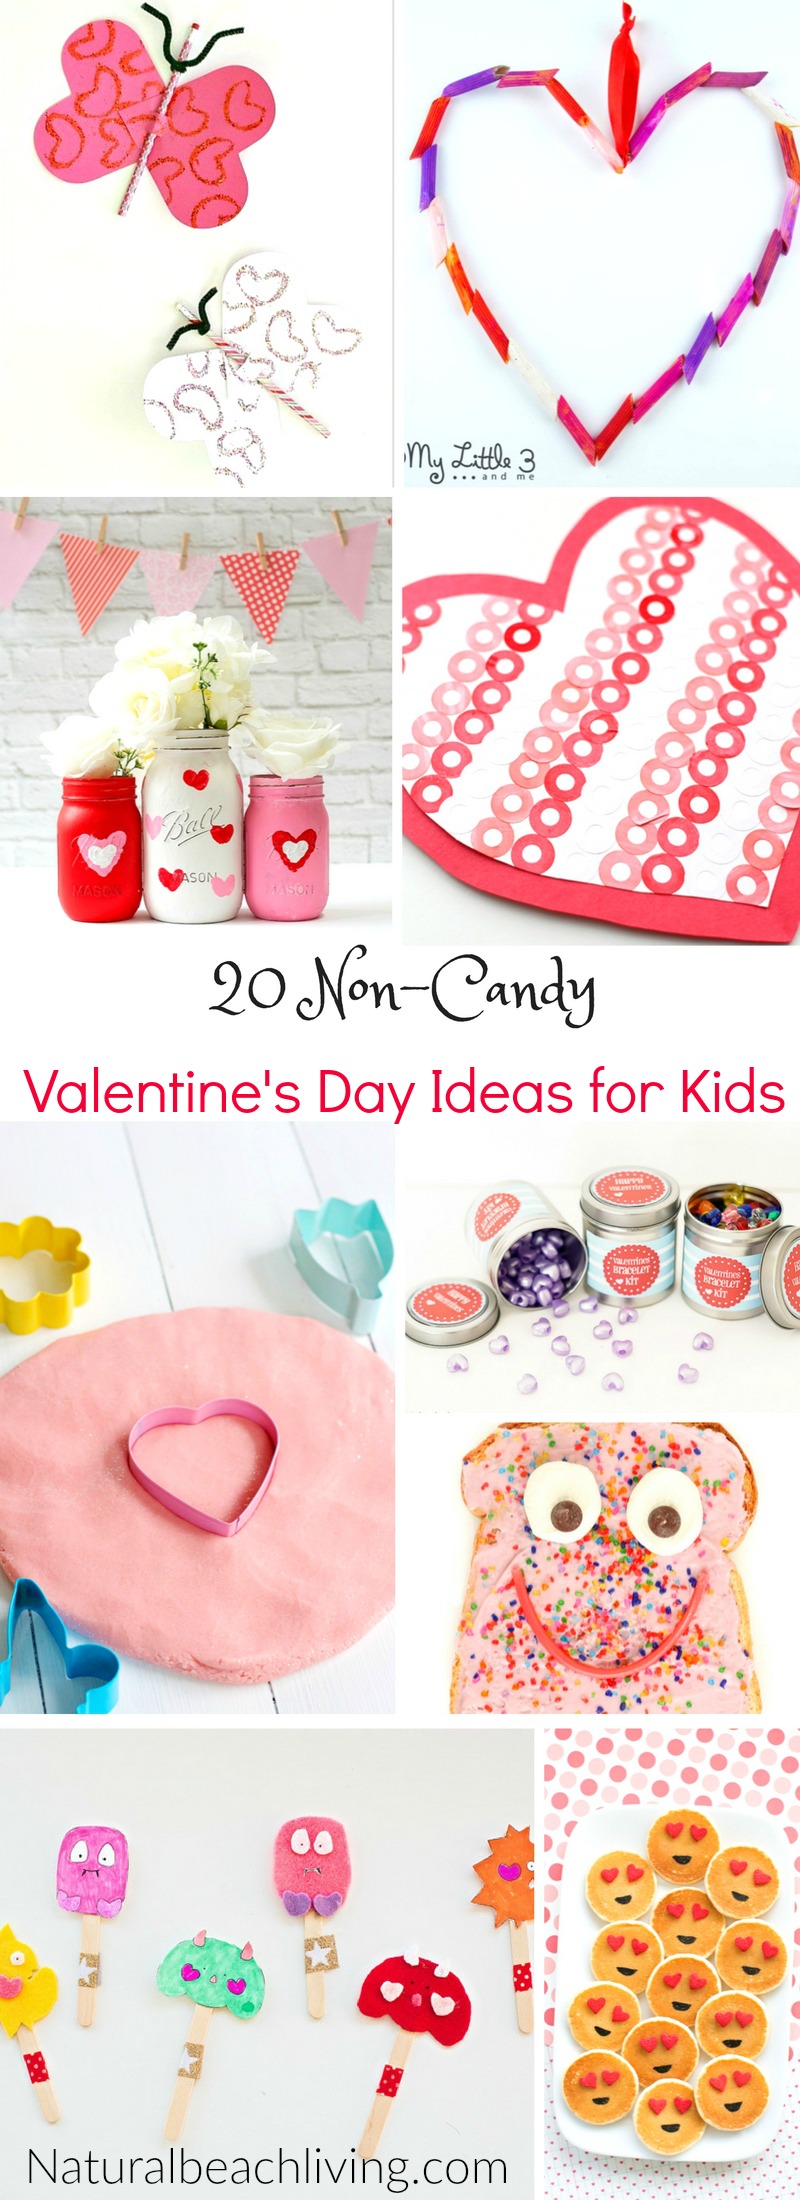 25+ Non Candy Valentine Ideas for Kids, Valentine's Day party ideas, So many fun activities for kids without serving up candy, Valentine's Day Ideas for School, Valentines Day Slime, Valentine's Day Sensory Play, Emoji ideas, Free Valentine's Day Printables